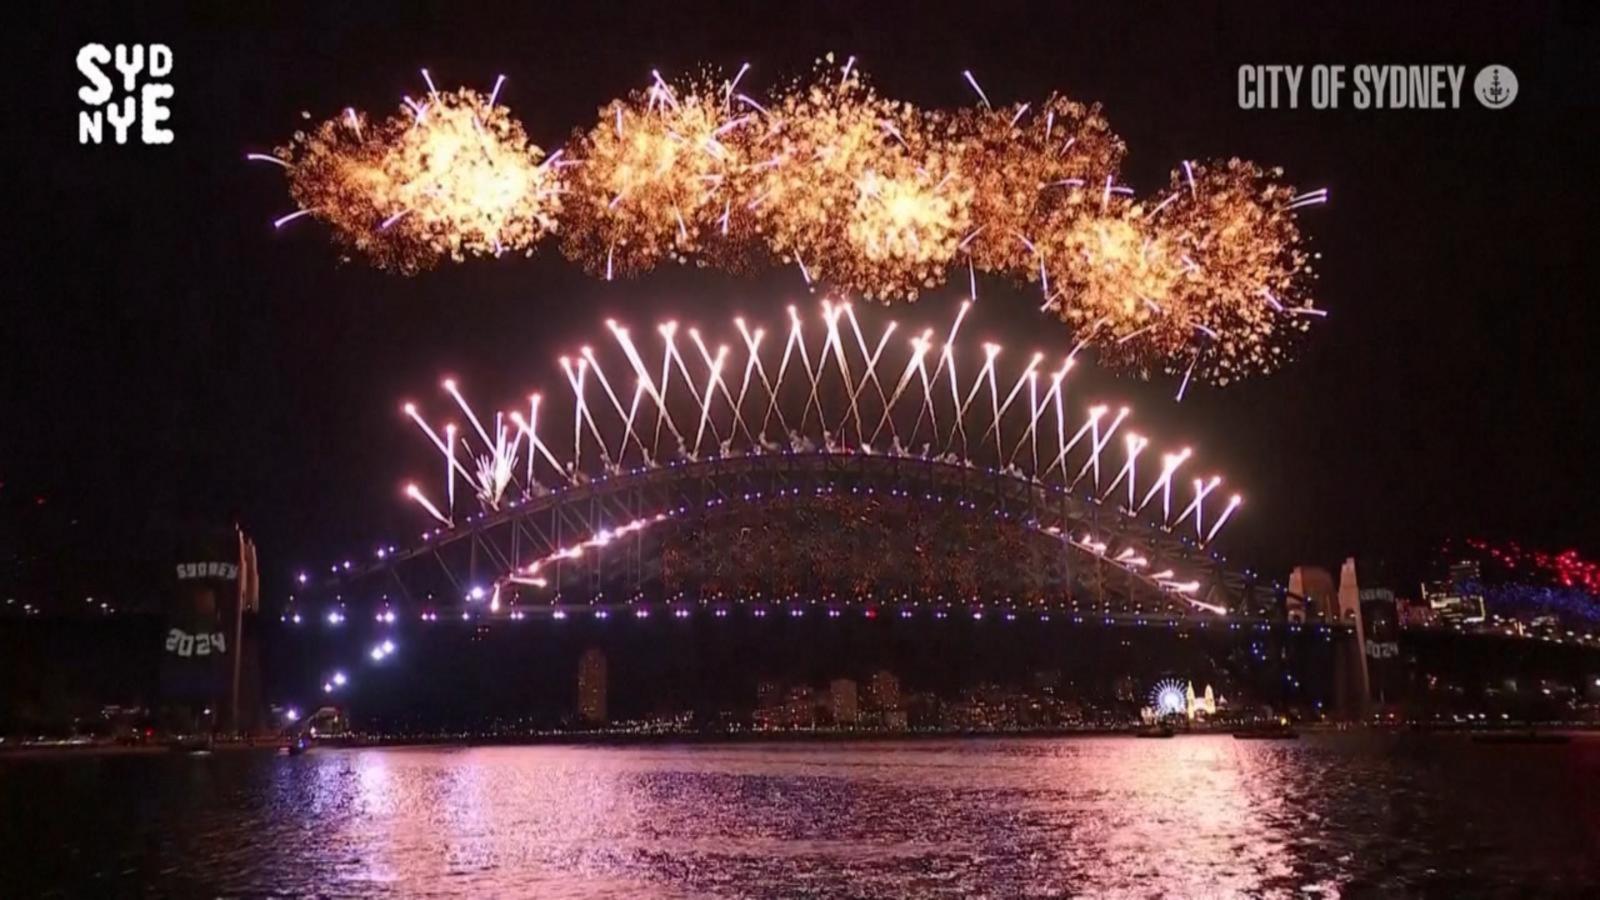 VIDEO: Worldwide New Year’s celebrations with increased security measures